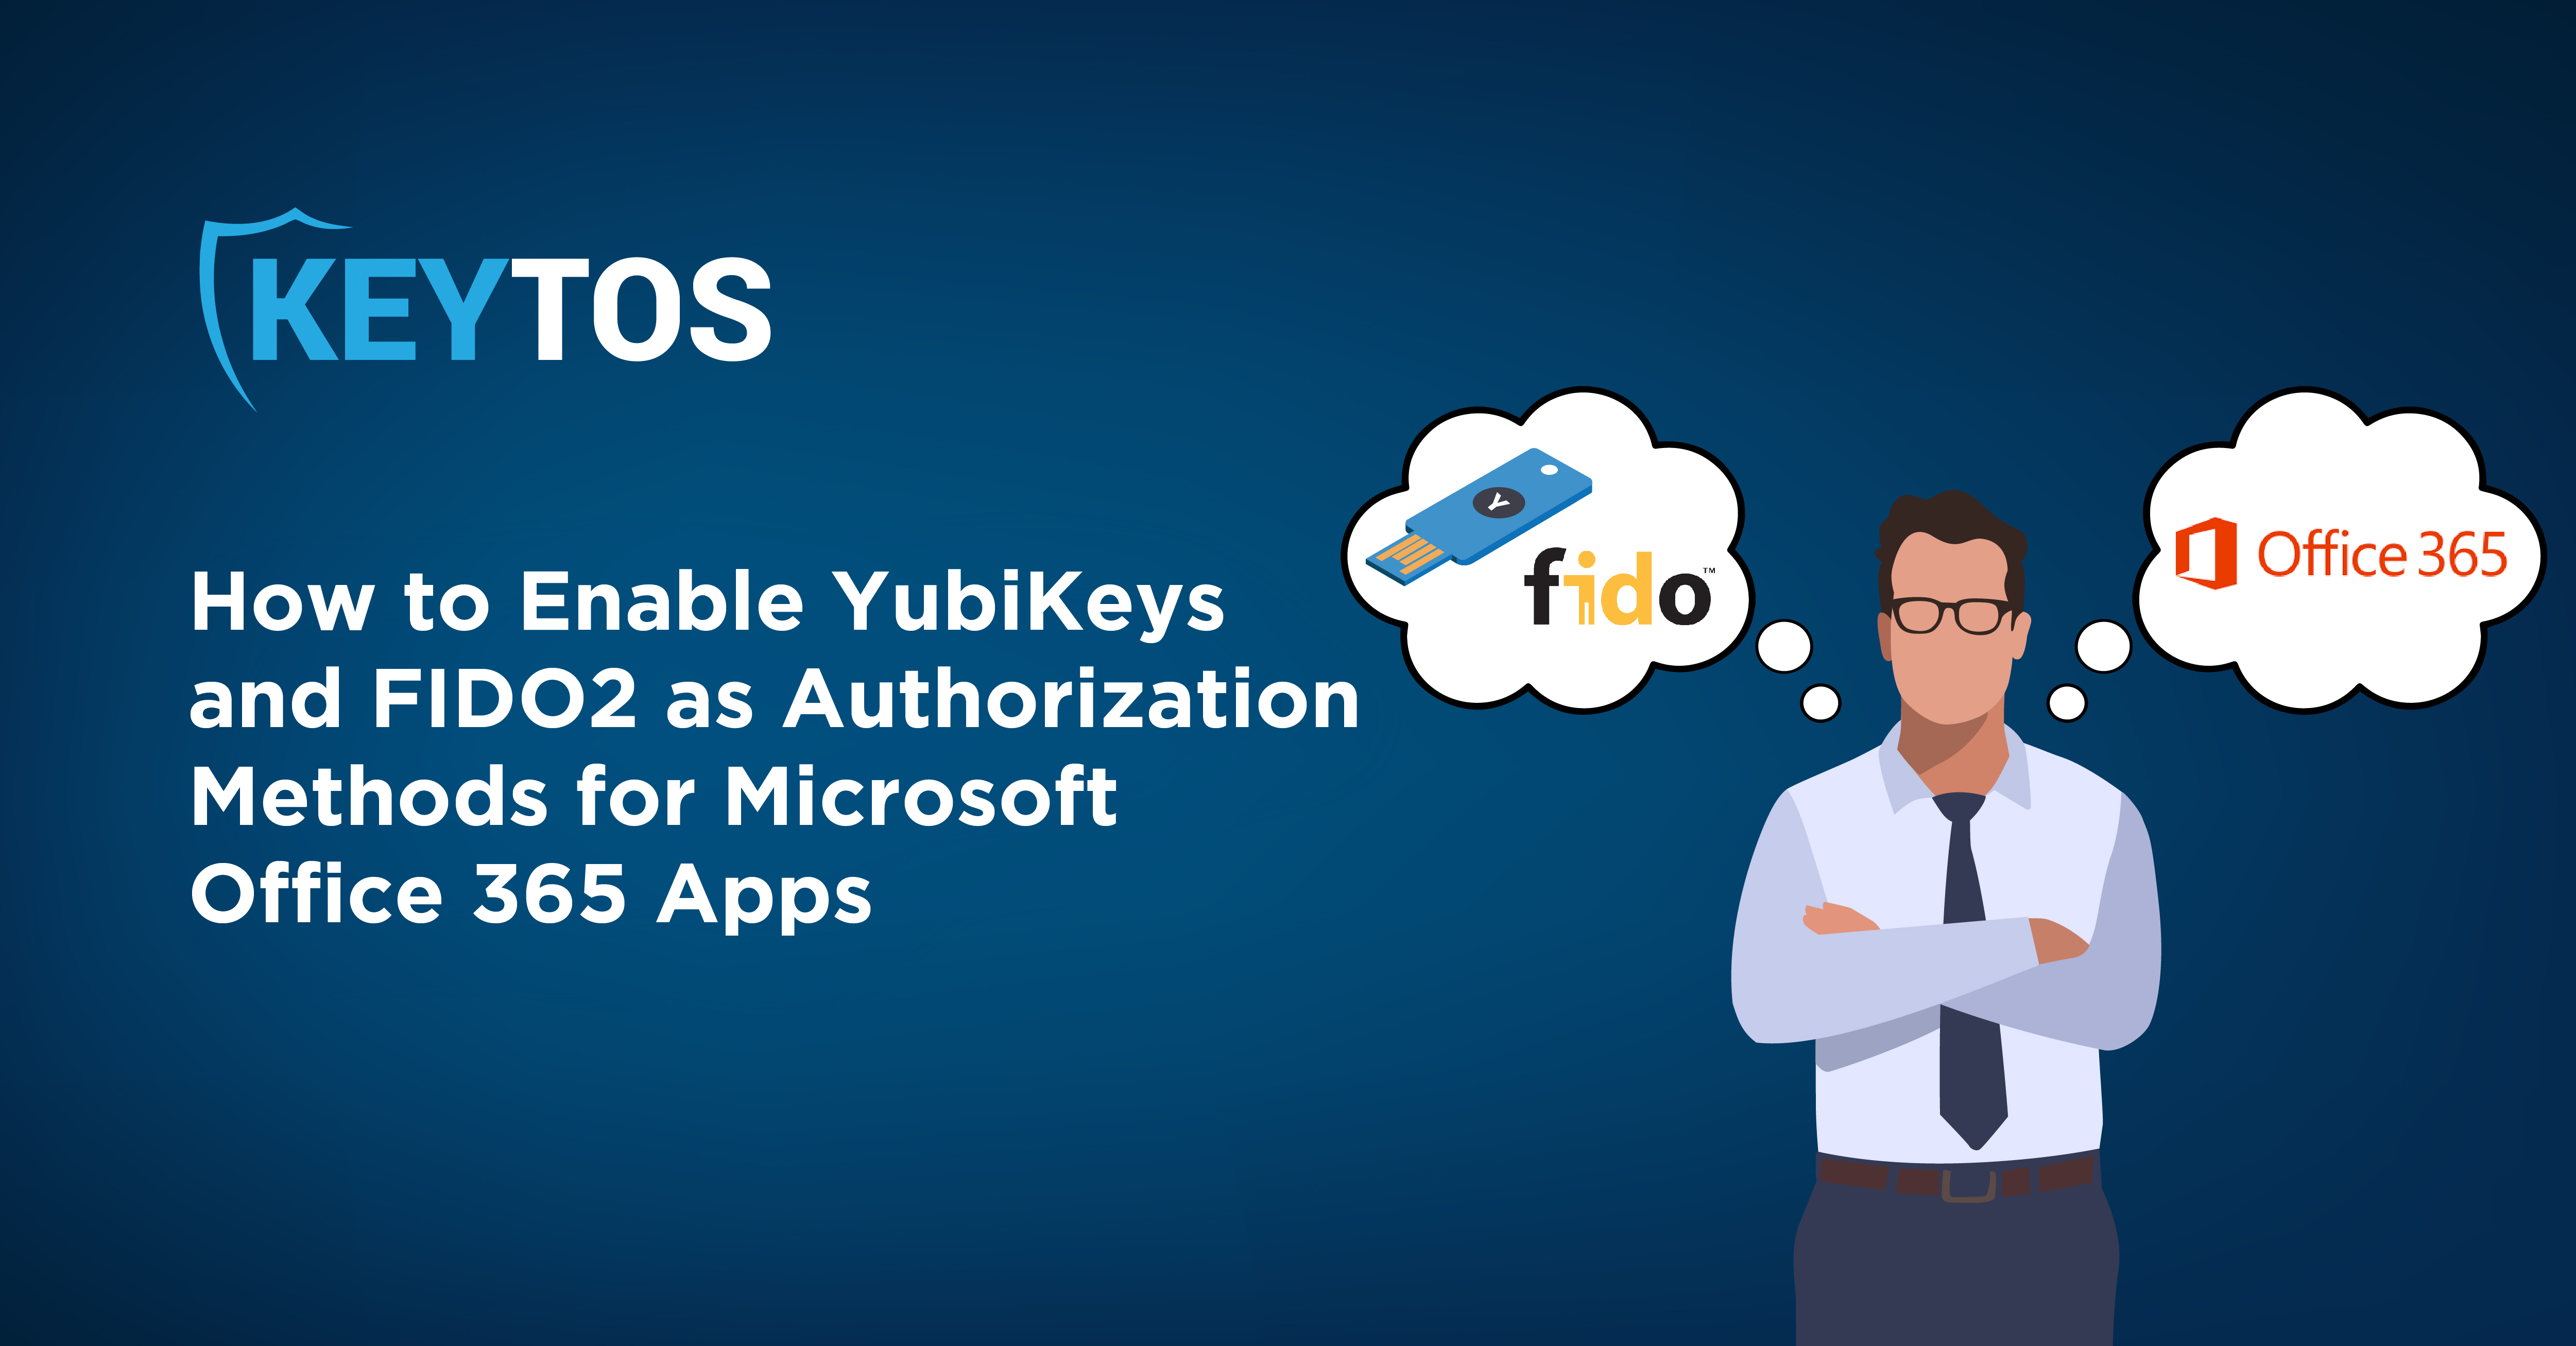 How to Enable YubiKeys and FIDO2 as Authorization Methods for Microsoft Office 365 Apps on macOS or iOS